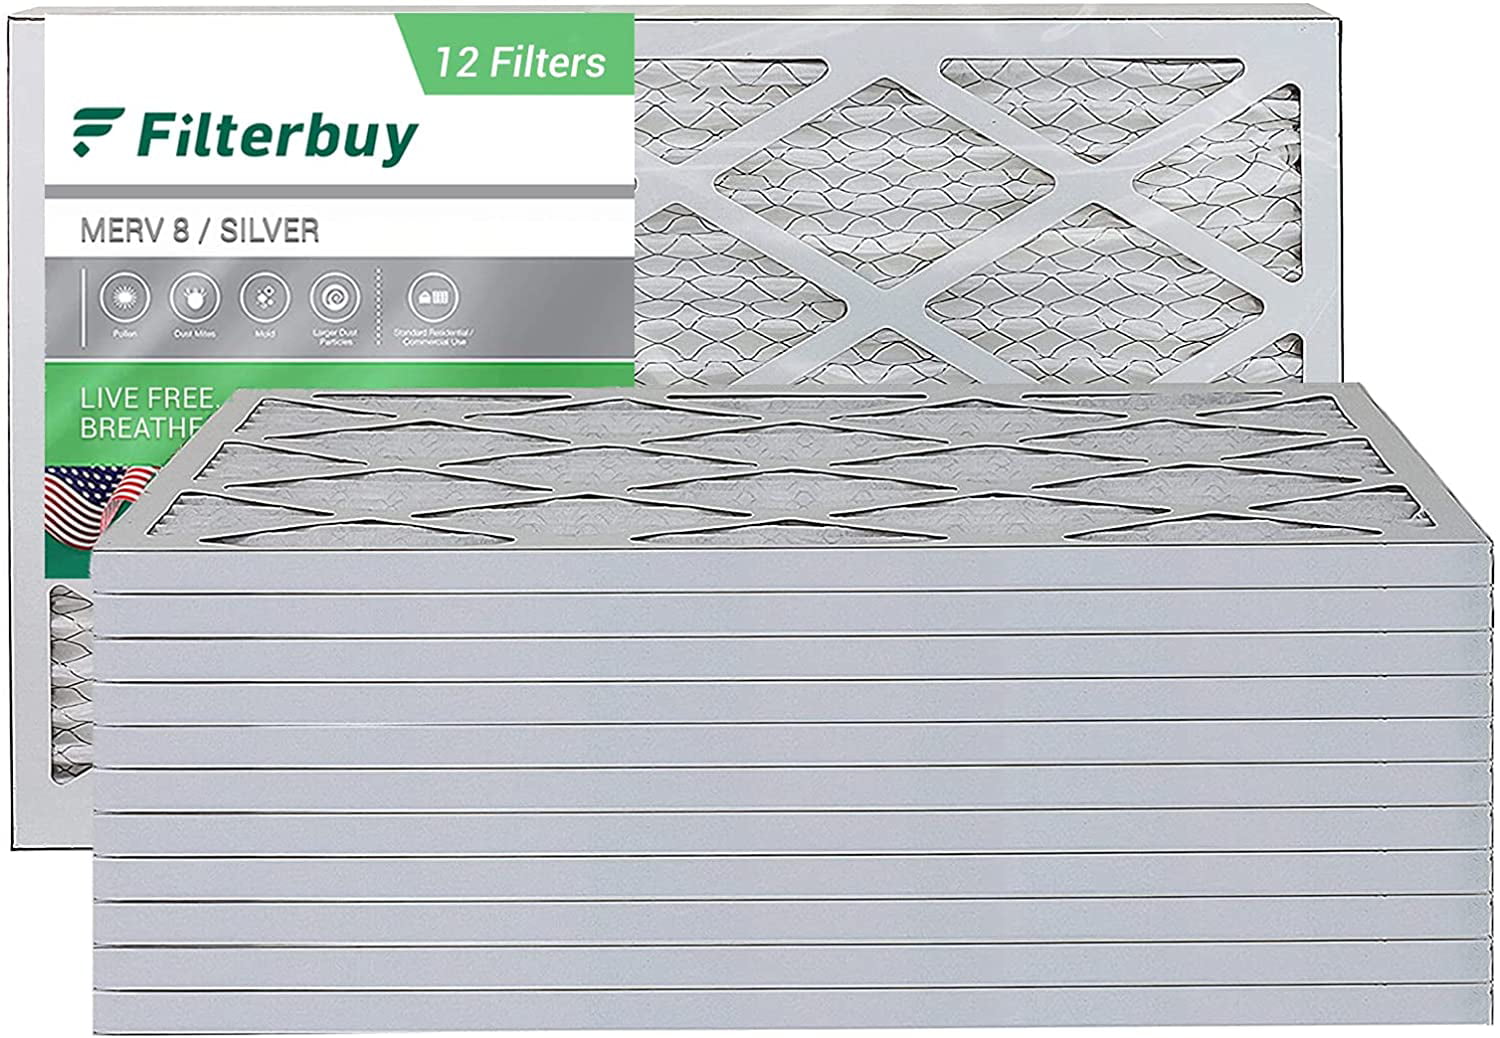 FilterBuy AFB MERV 8 12x24x1 Pleated AC Furnace Air Filter Pack of 4 Filters ... 